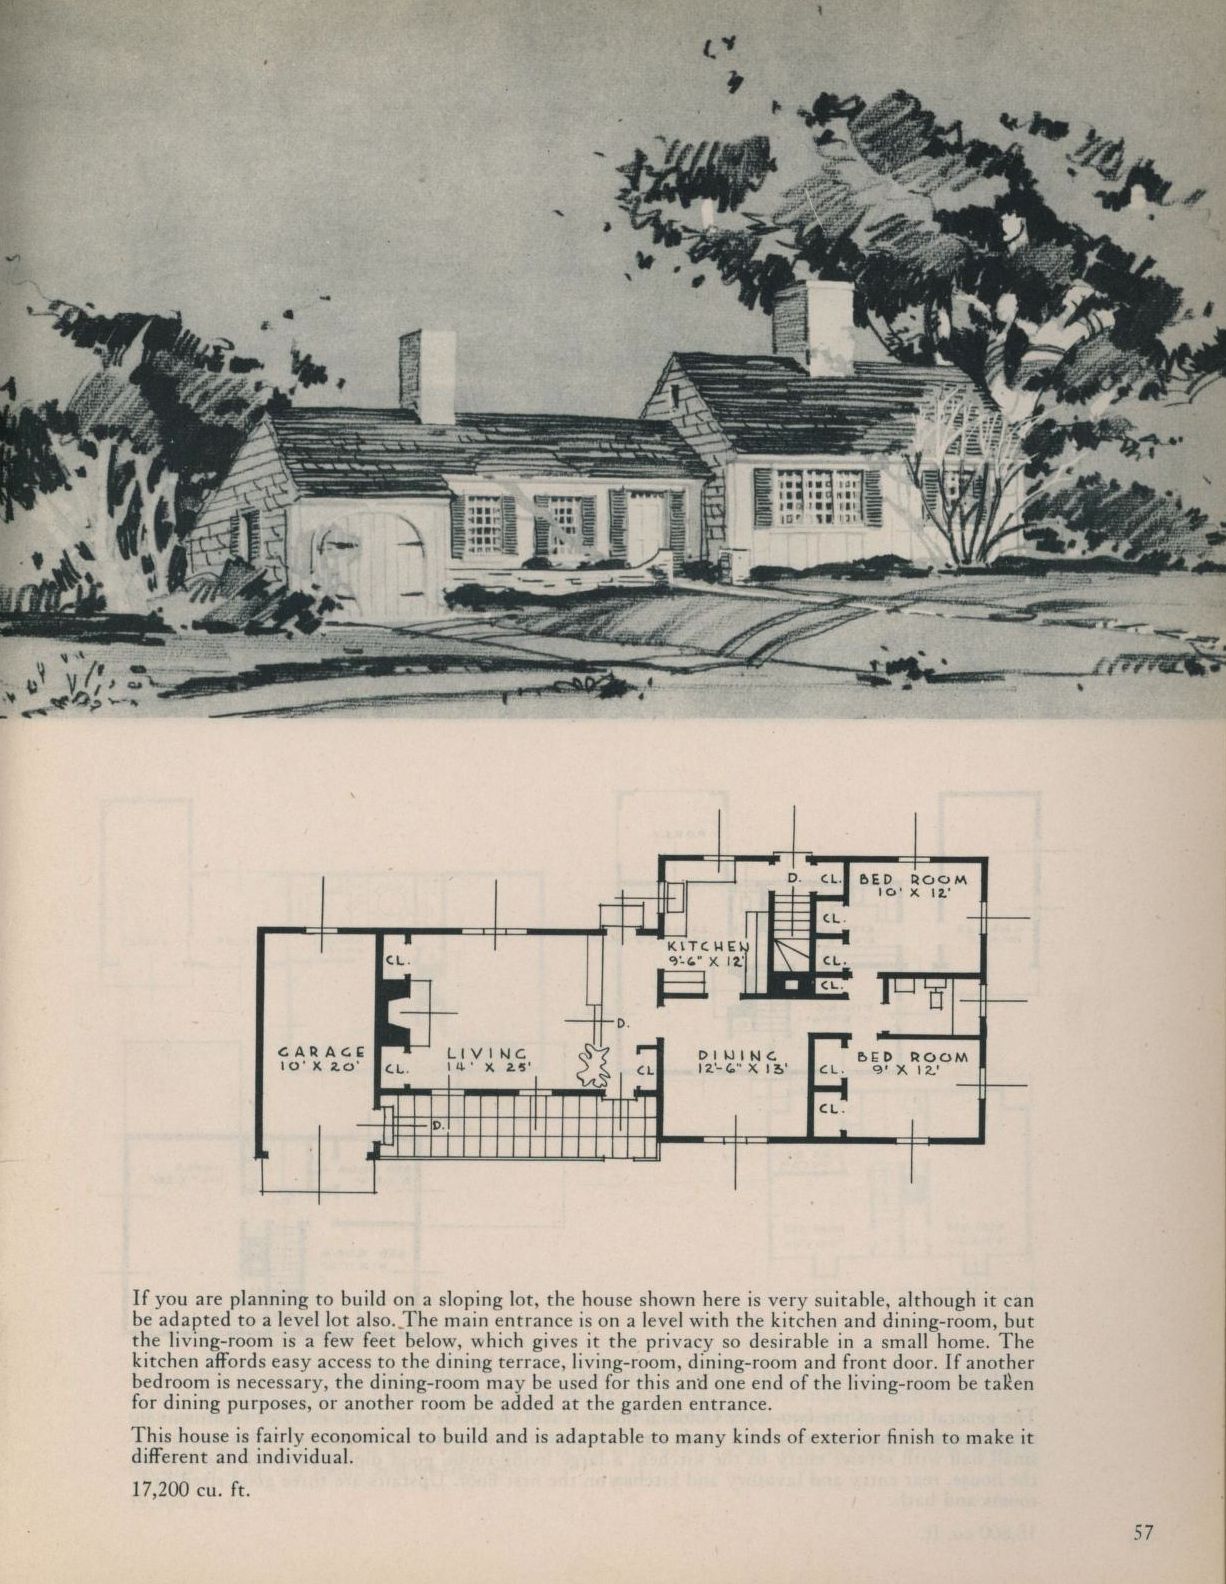 Houses for Home Makers, 1945. Royal Barry Wills, Architect